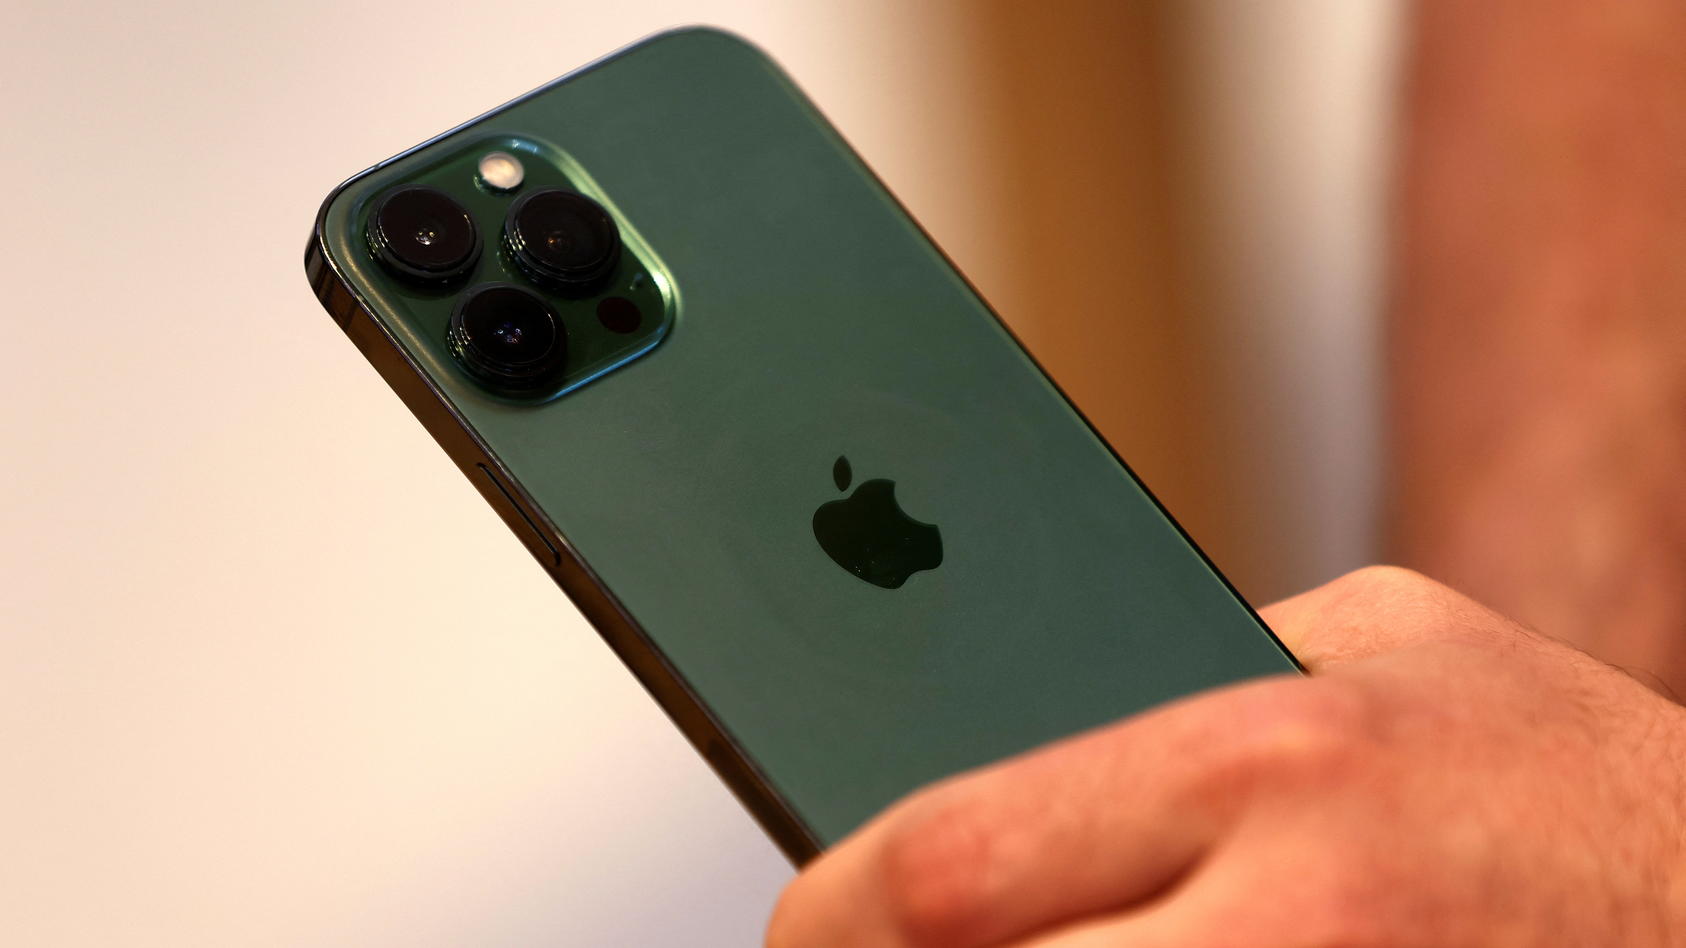 A customers holds the new green colour Apple iPhone 13 pro shortly after it went on sale inside the Apple Store on 5th Avenue in Manhattan in New York City, New York, U.S., March 18, 2022. REUTERS/Mike Segar